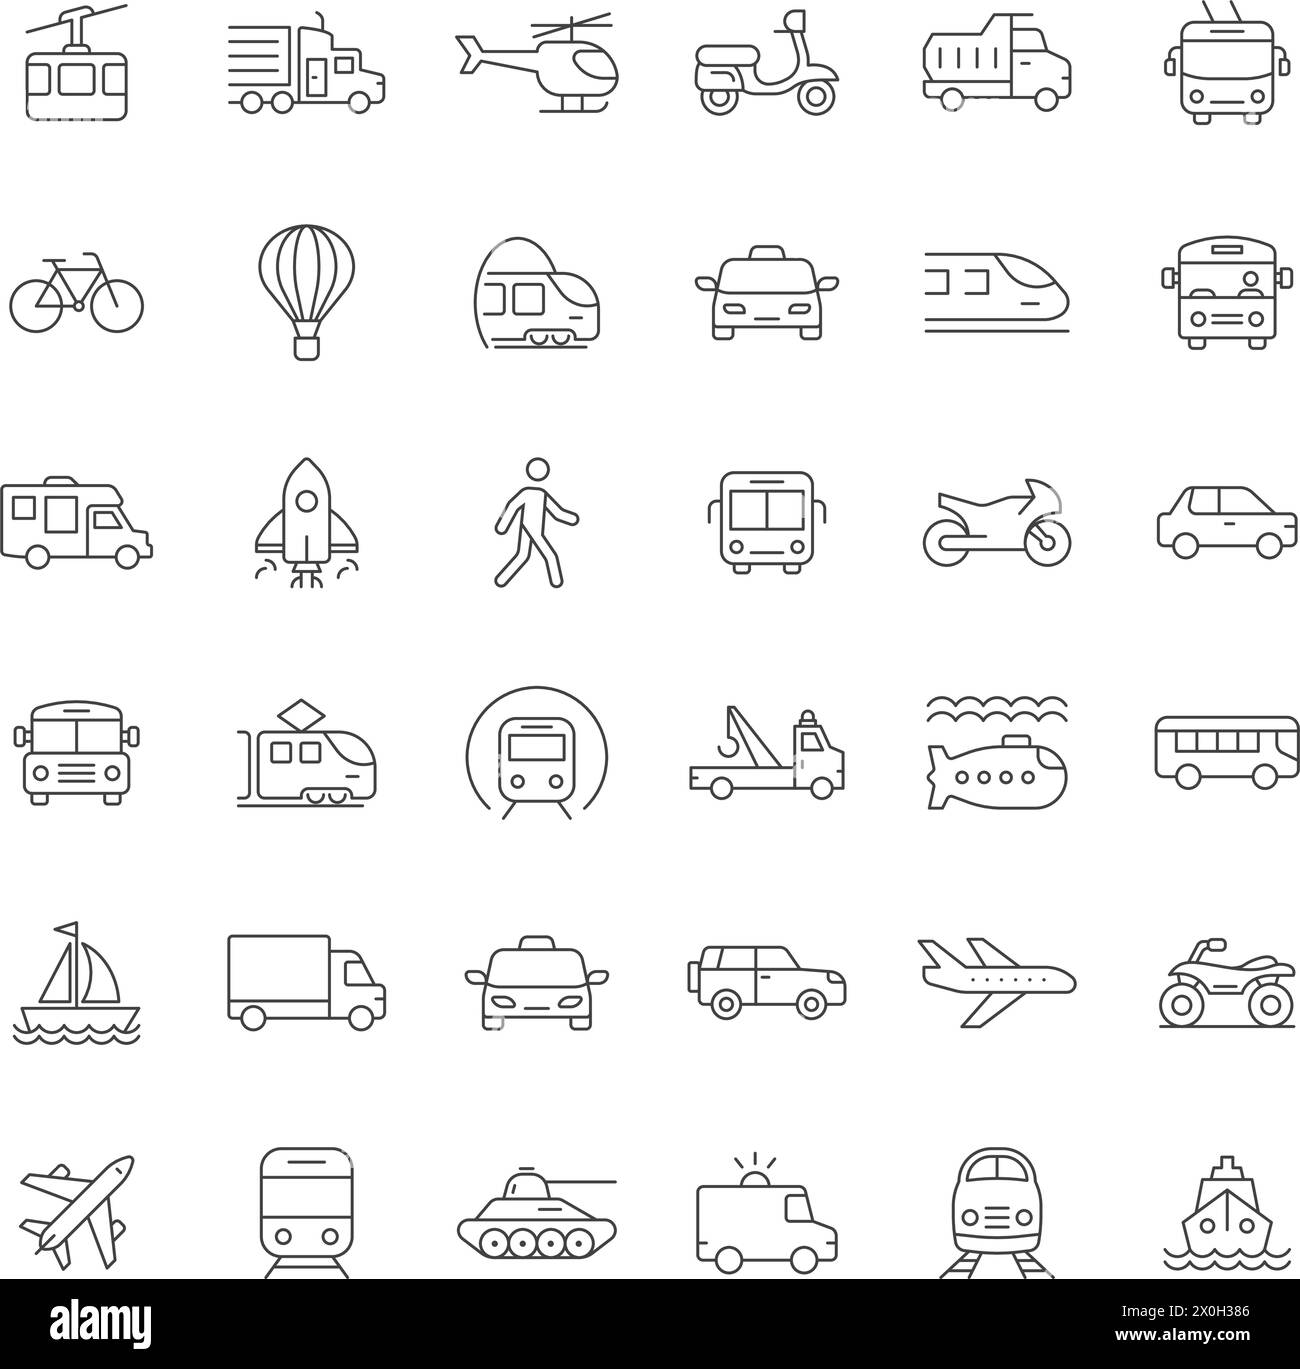 Transport icons set in flat style. Transportation vector illustration on isolated background. Vehicle sign business concept. Stock Vector